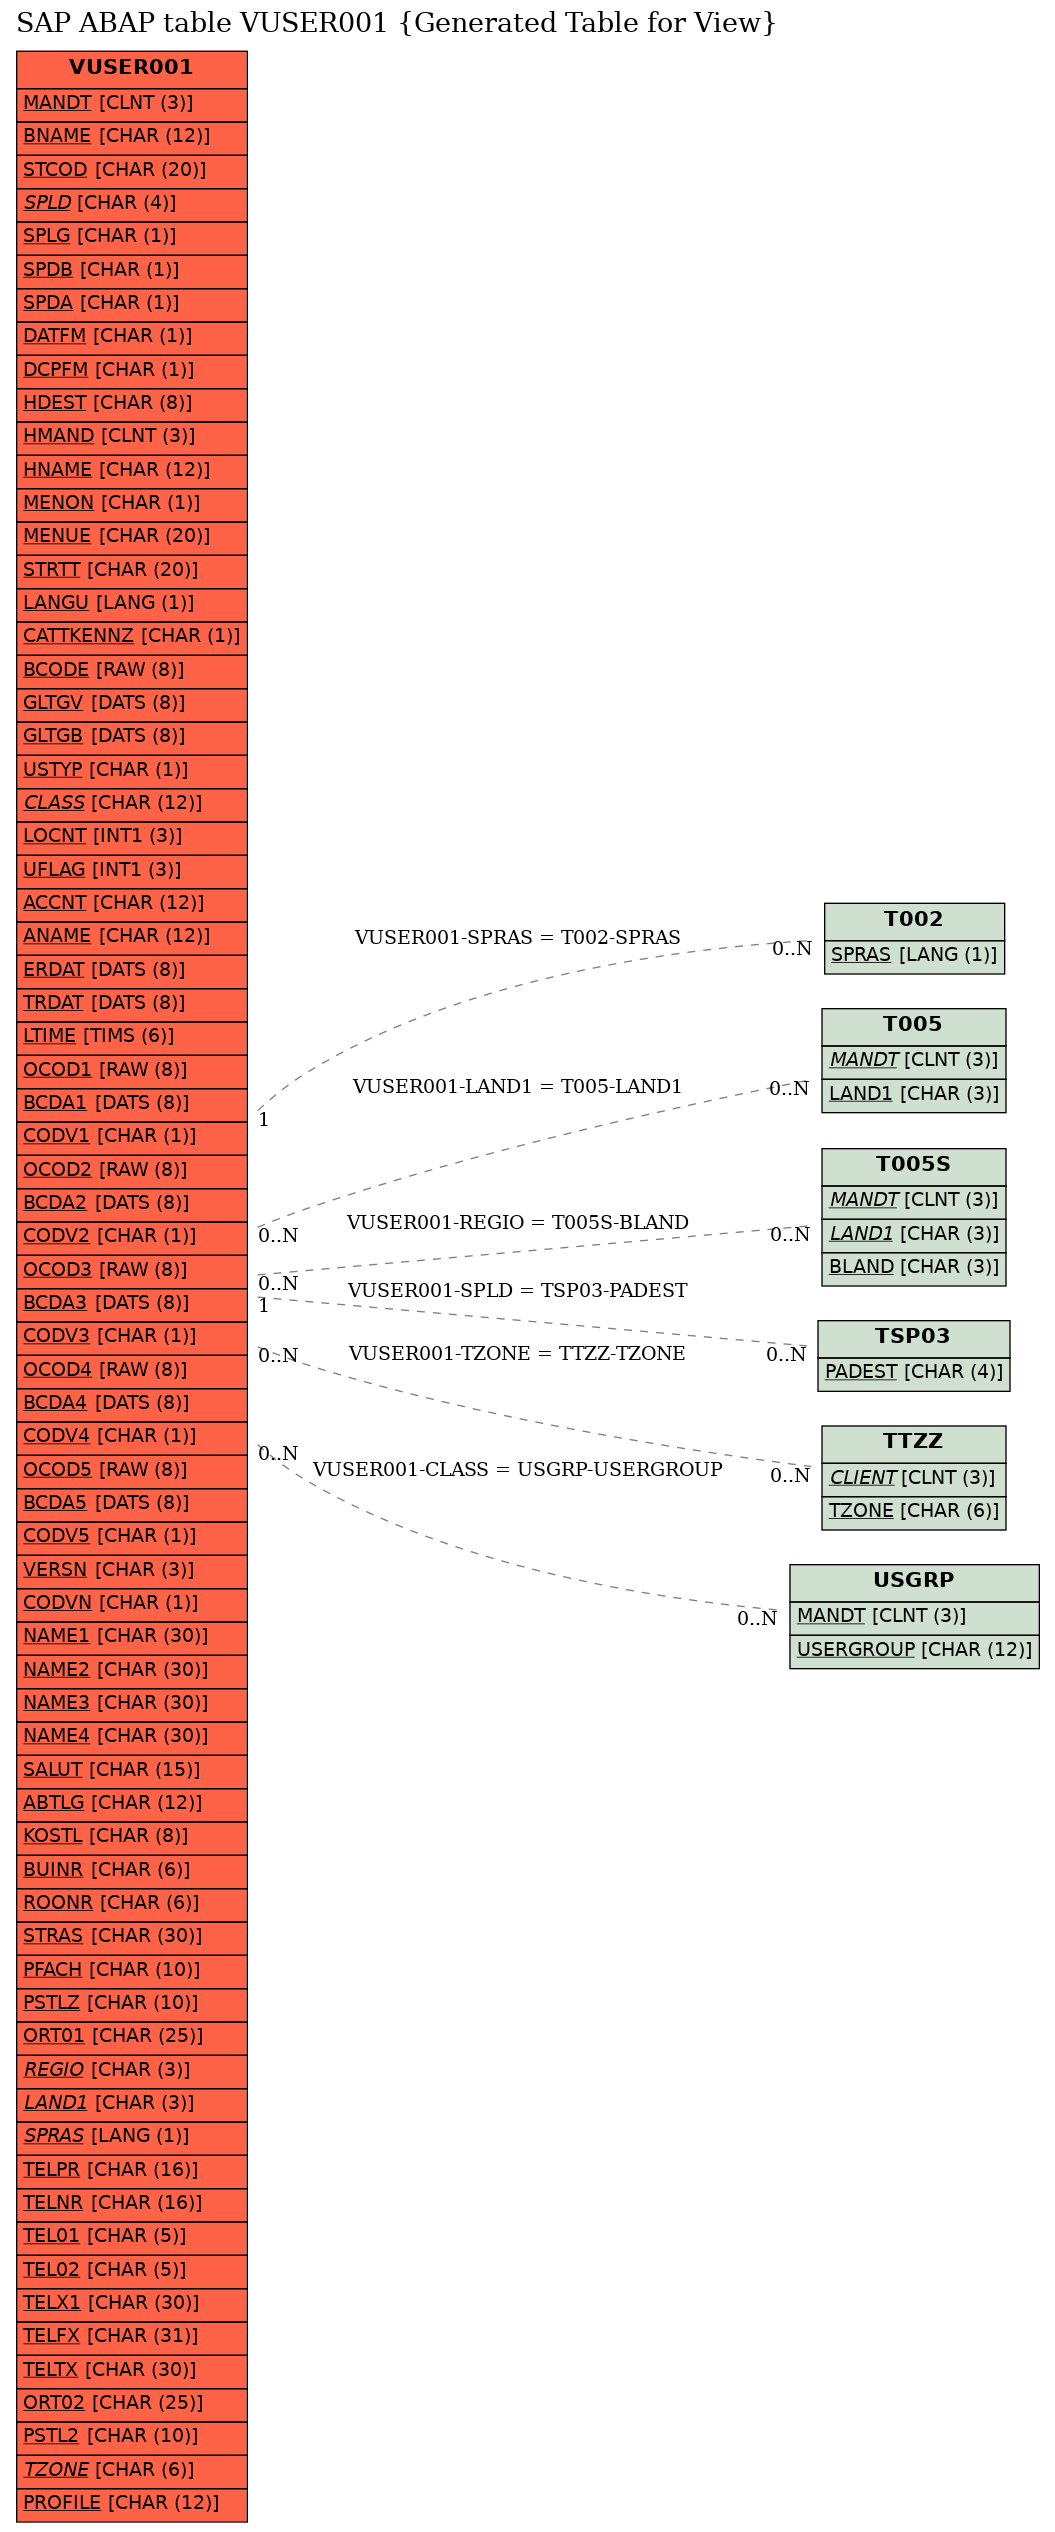 E-R Diagram for table VUSER001 (Generated Table for View)